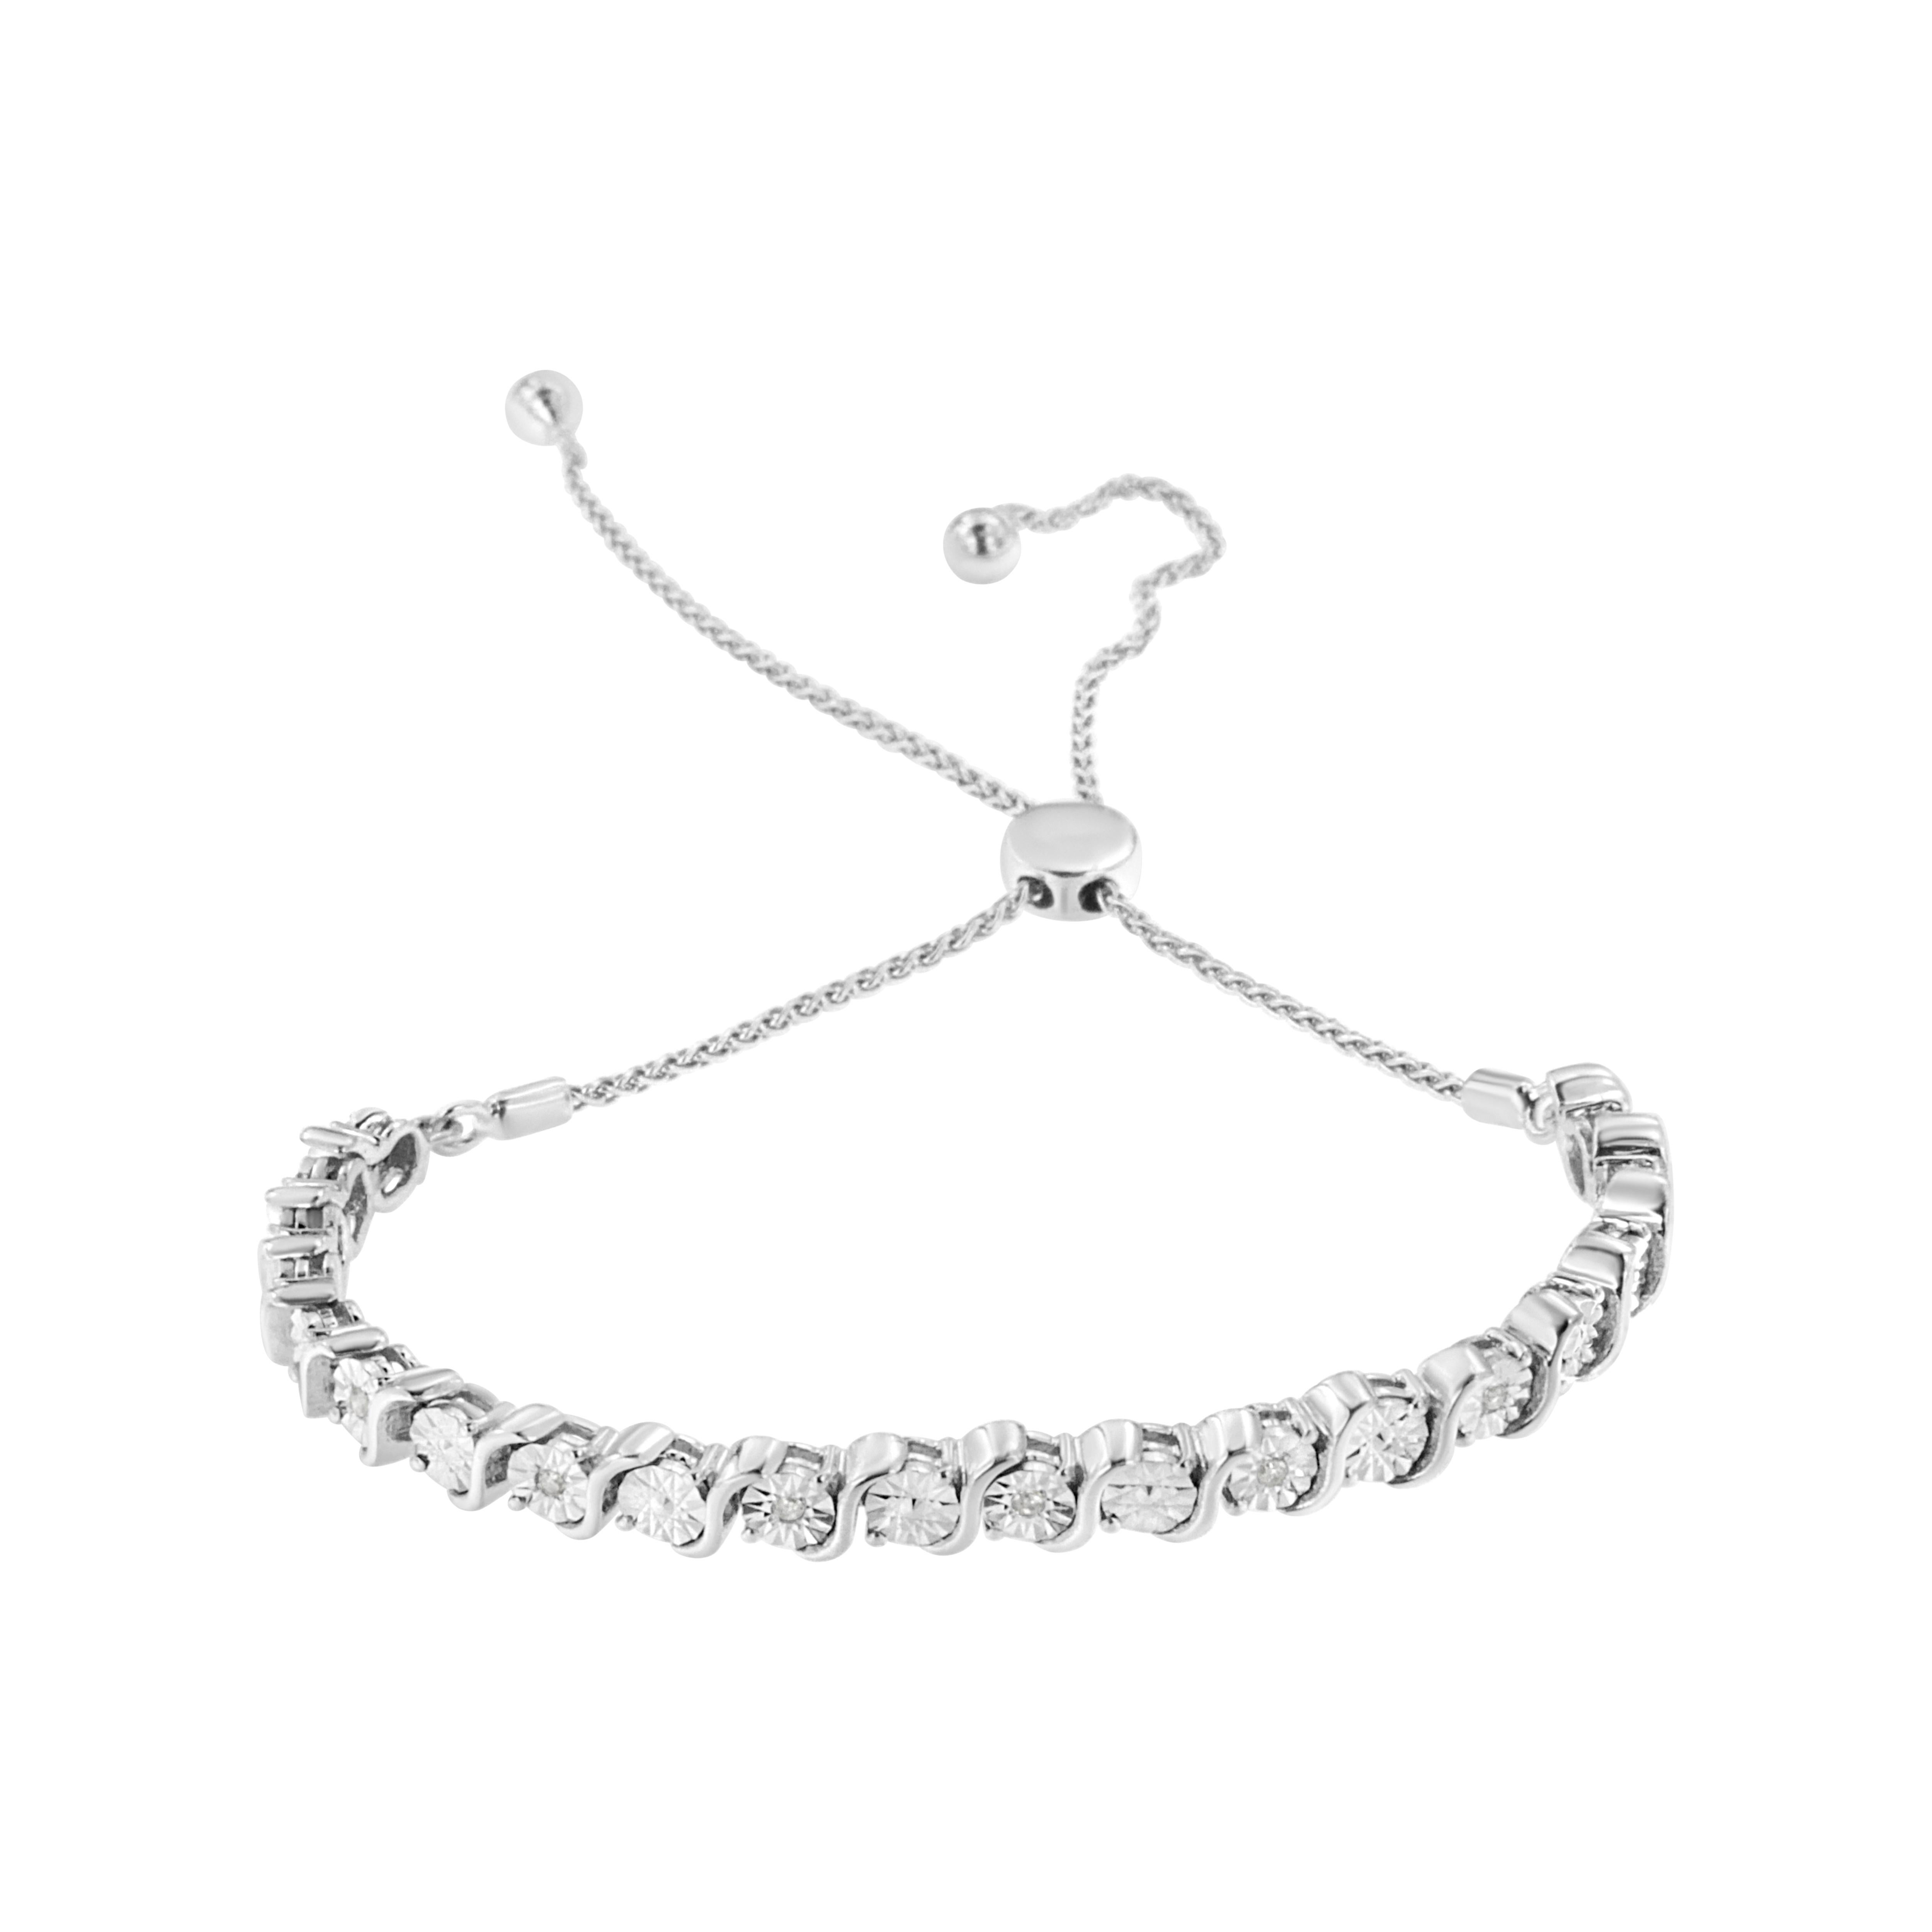 Sleek and graceful, this sparkling diamond tennis bolo adjustable bracelet is a look she'll choose to wear often. Fashioned in your .925 sterling silver, this shimmering style features a glimmering row of miracle plated set diamonds interwoven with